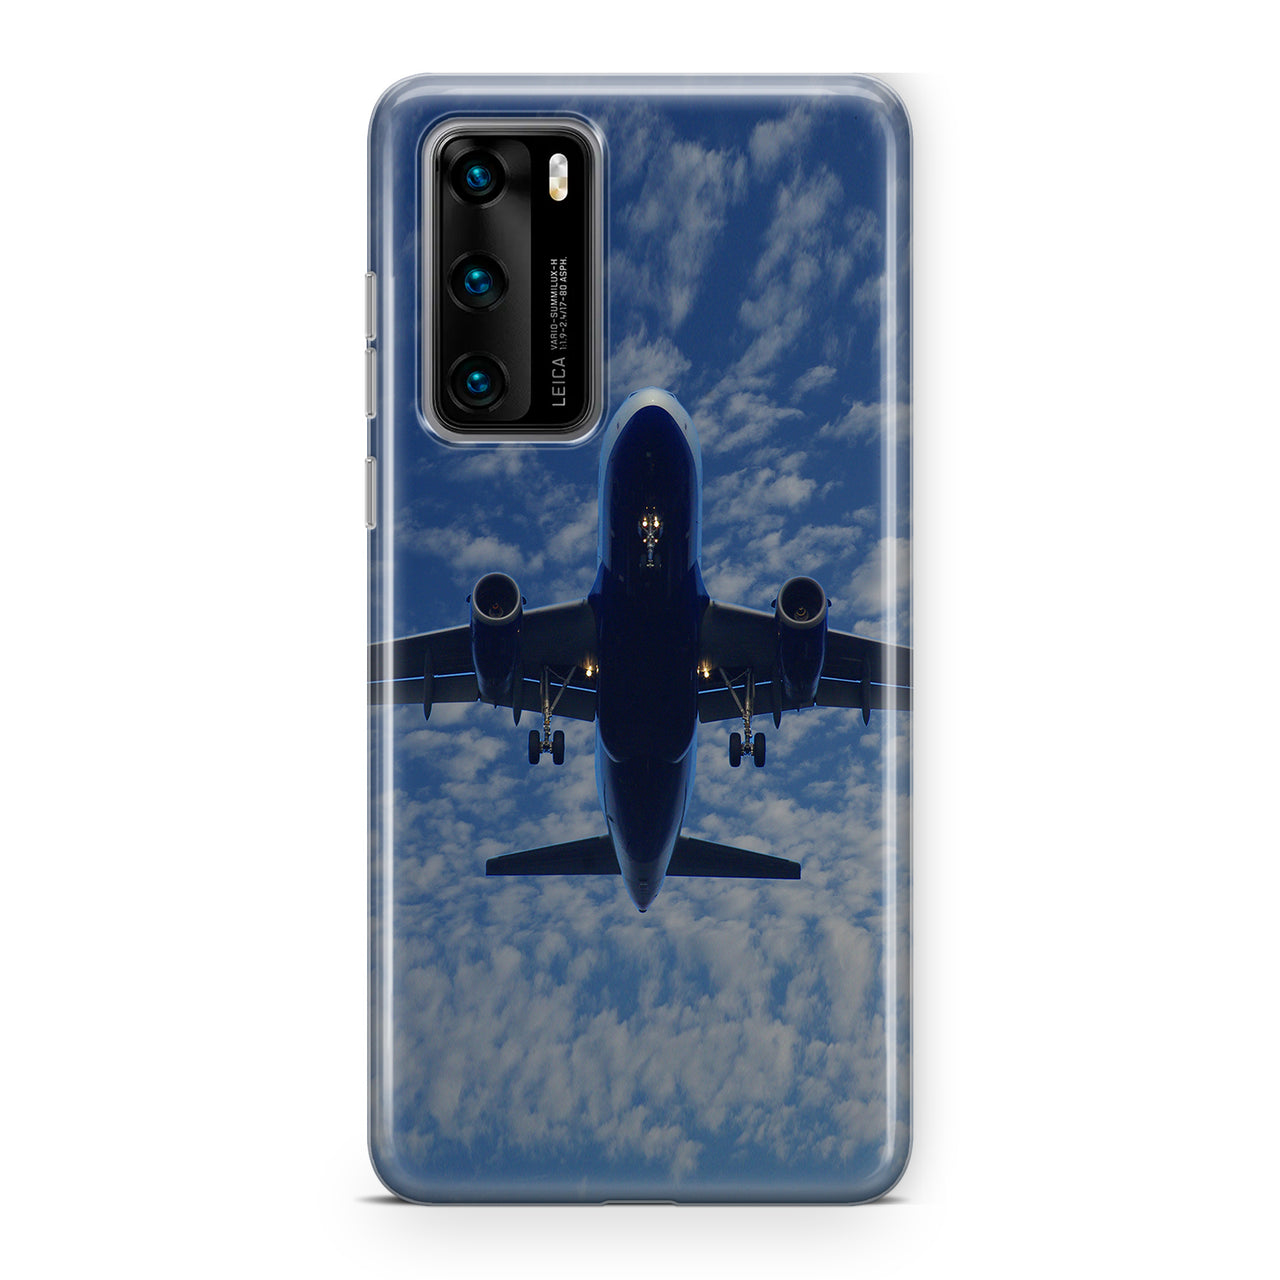 Airplane From Below Designed Huawei Cases